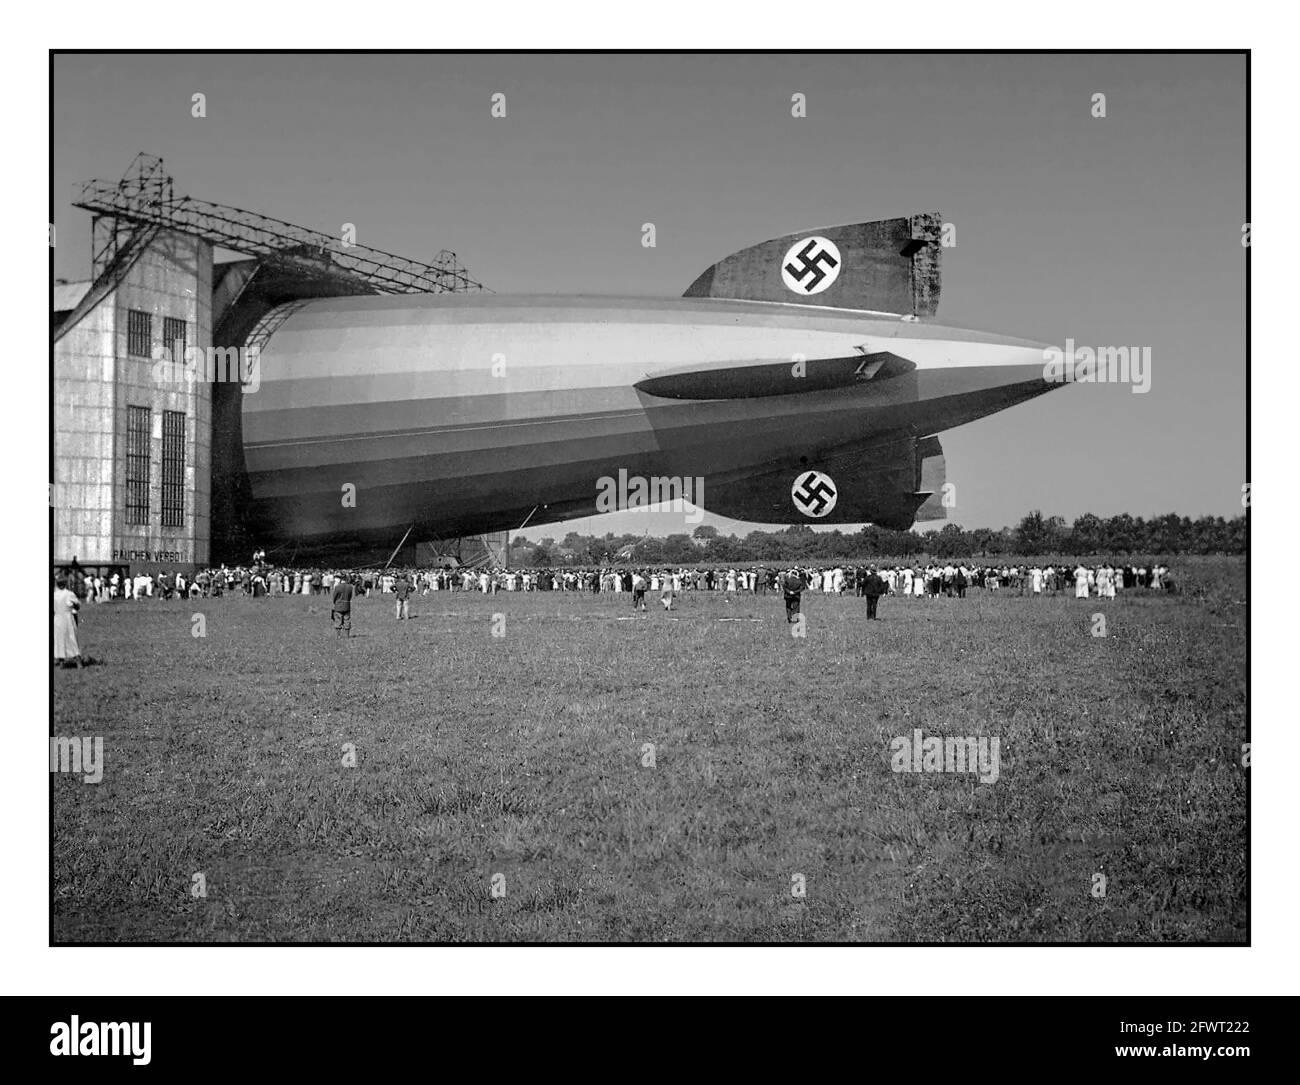 The 'Graf Zeppelin,' Friedrichshafen, Germany, 1936. 'The Nazi Monster'  a huge airship with Swastika tail fin emblems displayed half out of a hangar at Friedrichshafen with crowds of visitors watching on at the new travel technology Nazi Germany 1930's Stock Photo